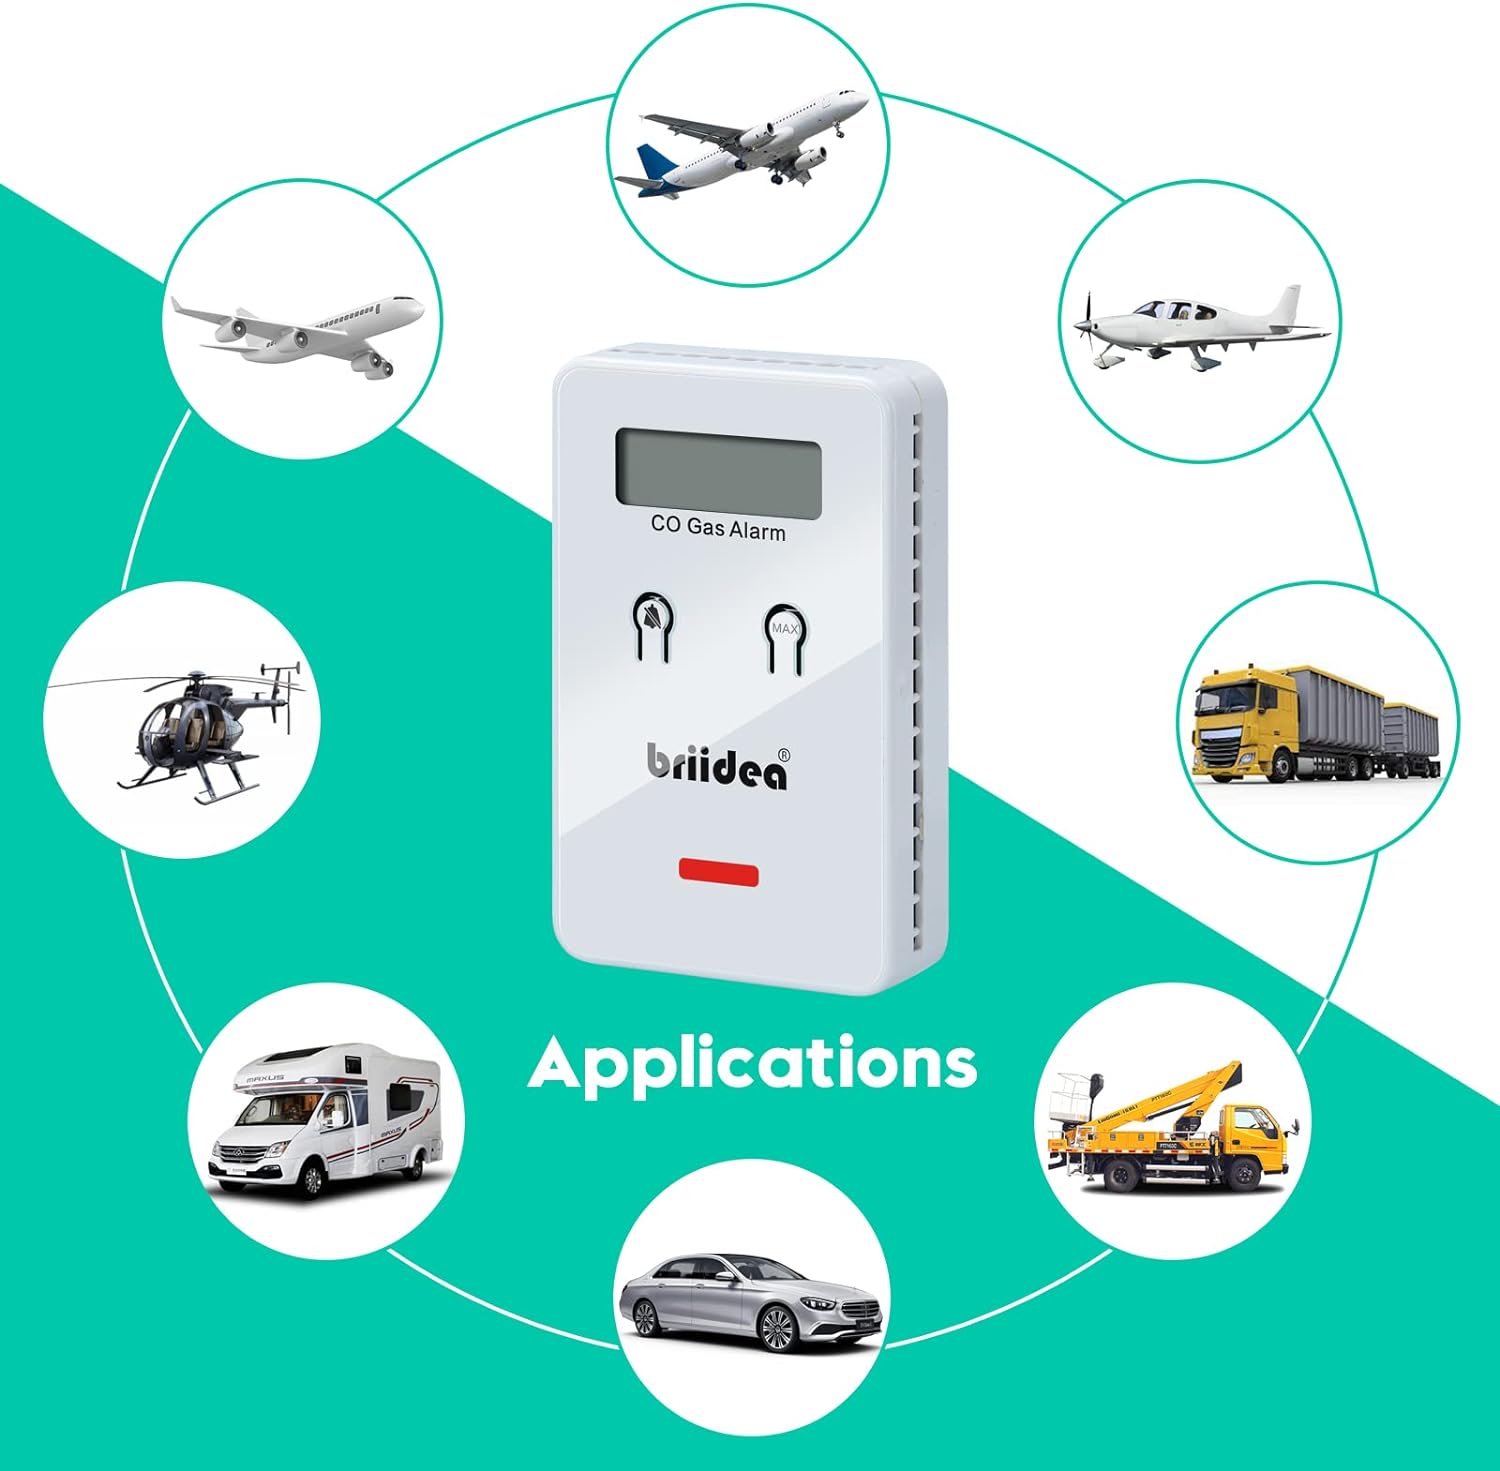 Carbon Monoxide Detector for Car, Briidea White Low-Level Fast 9ppm Alarm CO Detector, Widely Used in Vehicles Aircraft Travel Bus Trucks